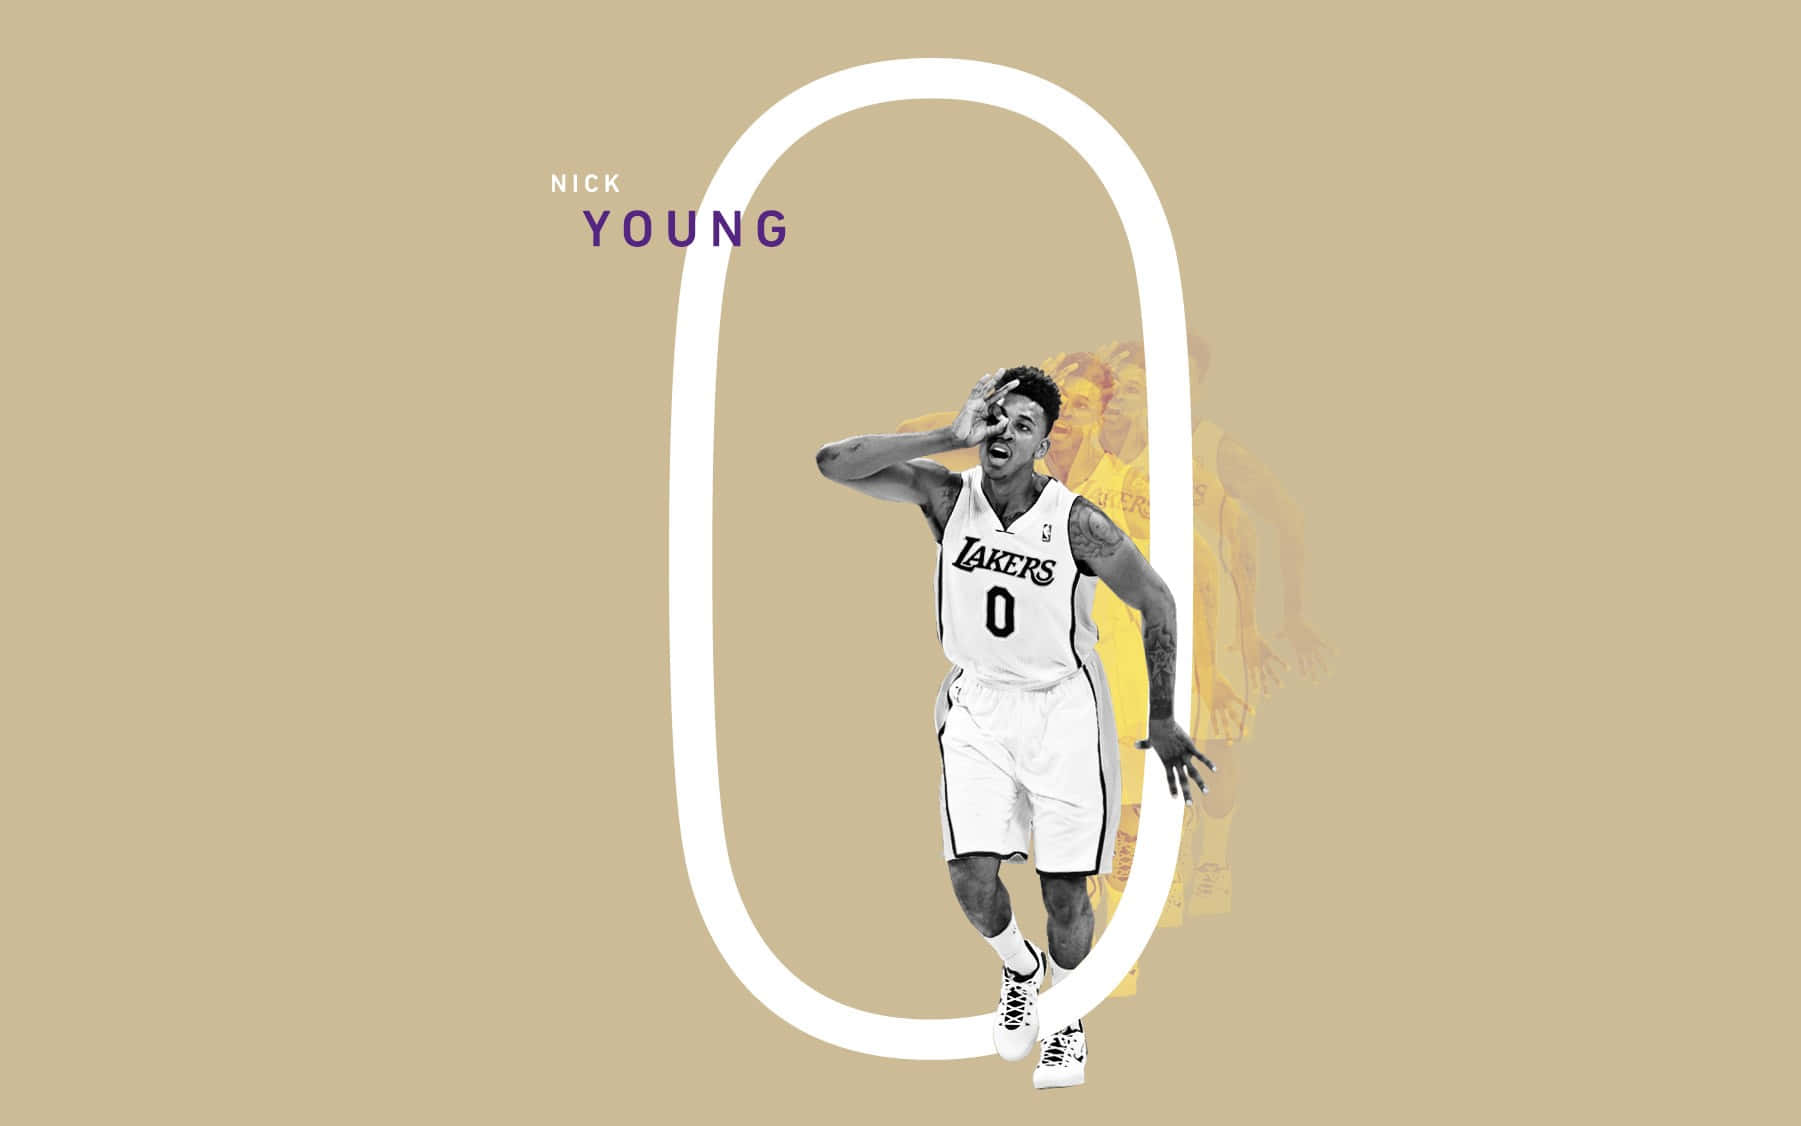 Nick Young Is Number Zero Background